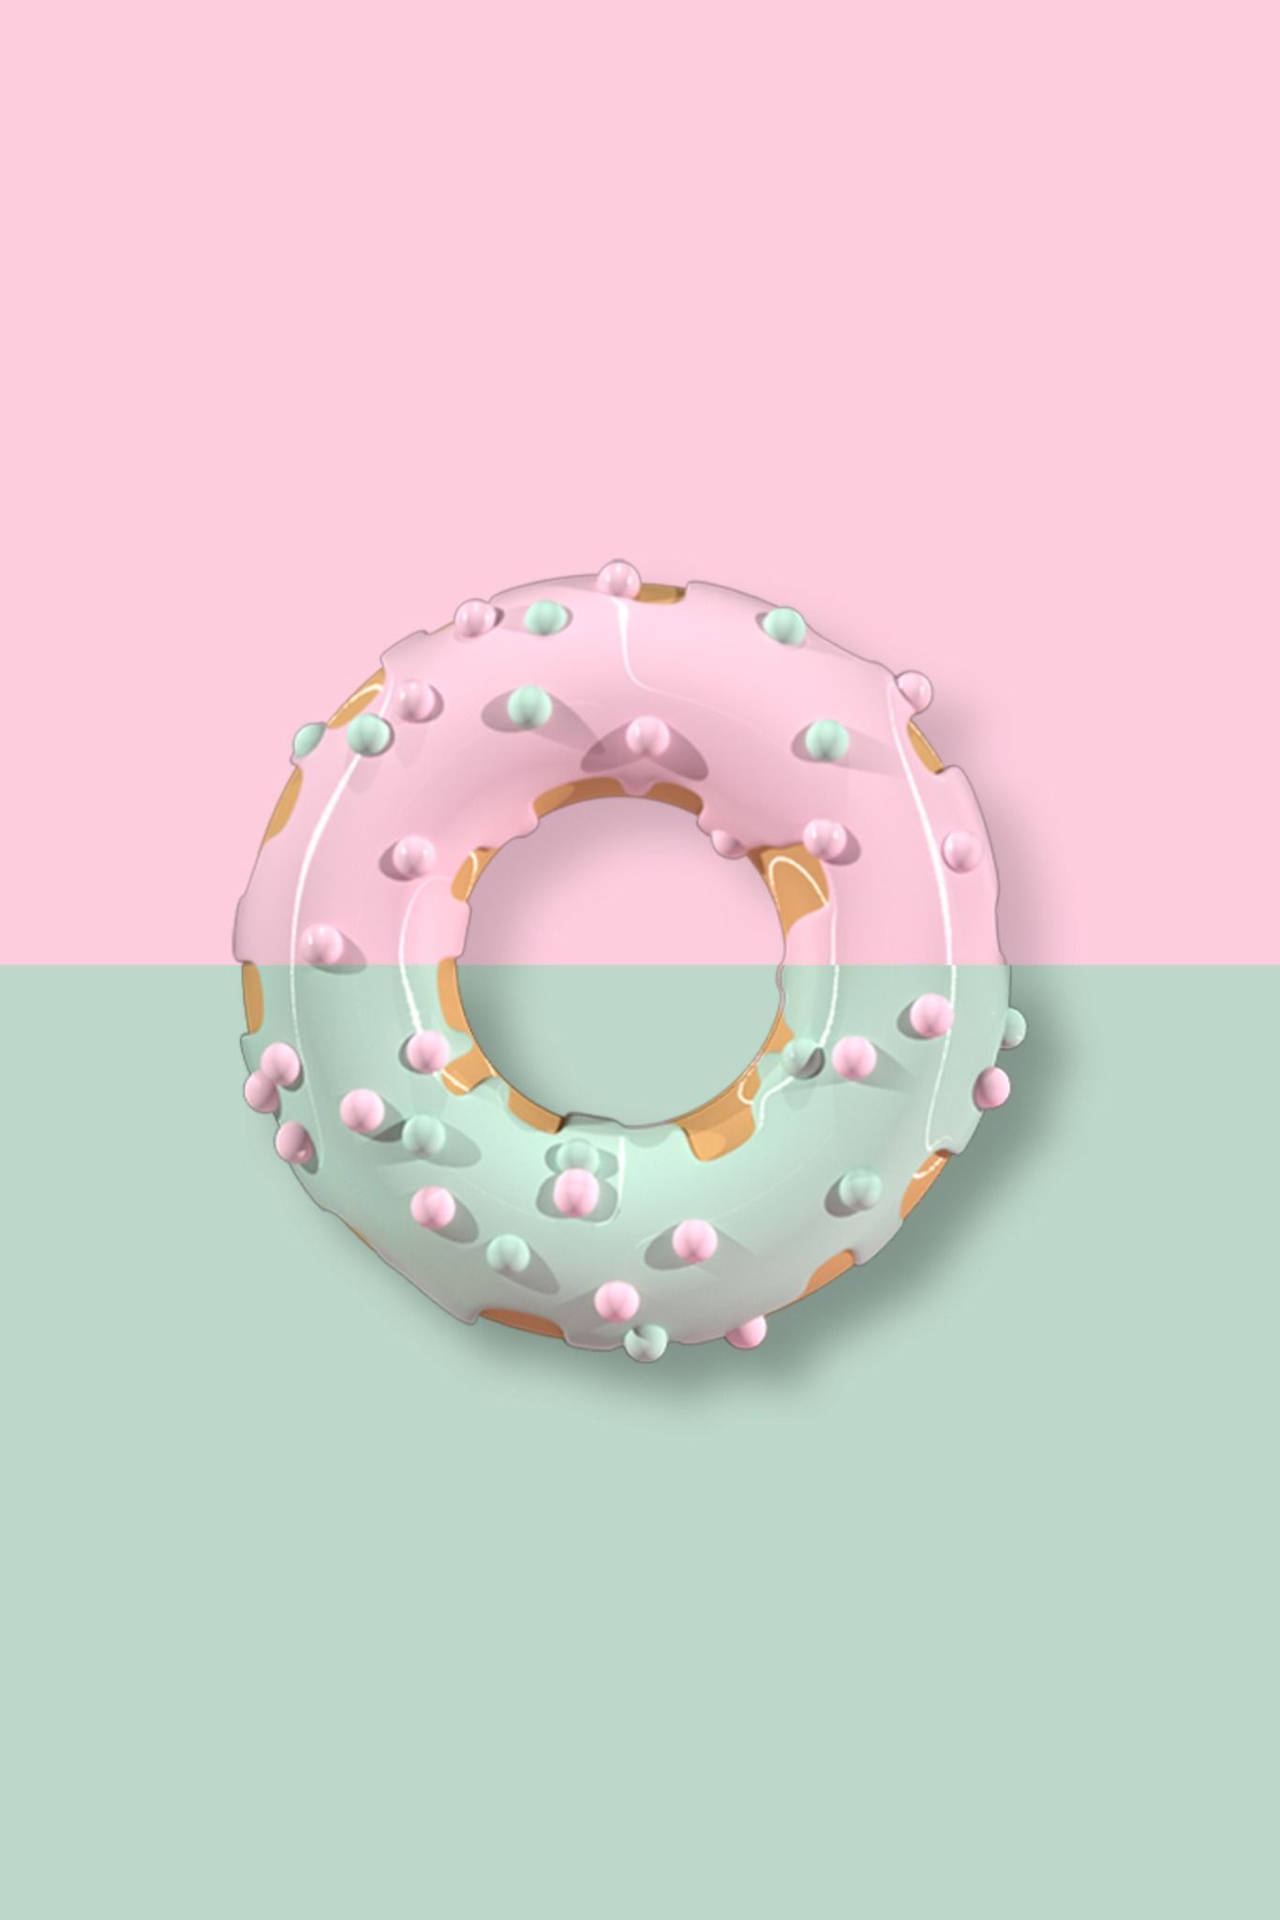 Pastel-colored Donut Background